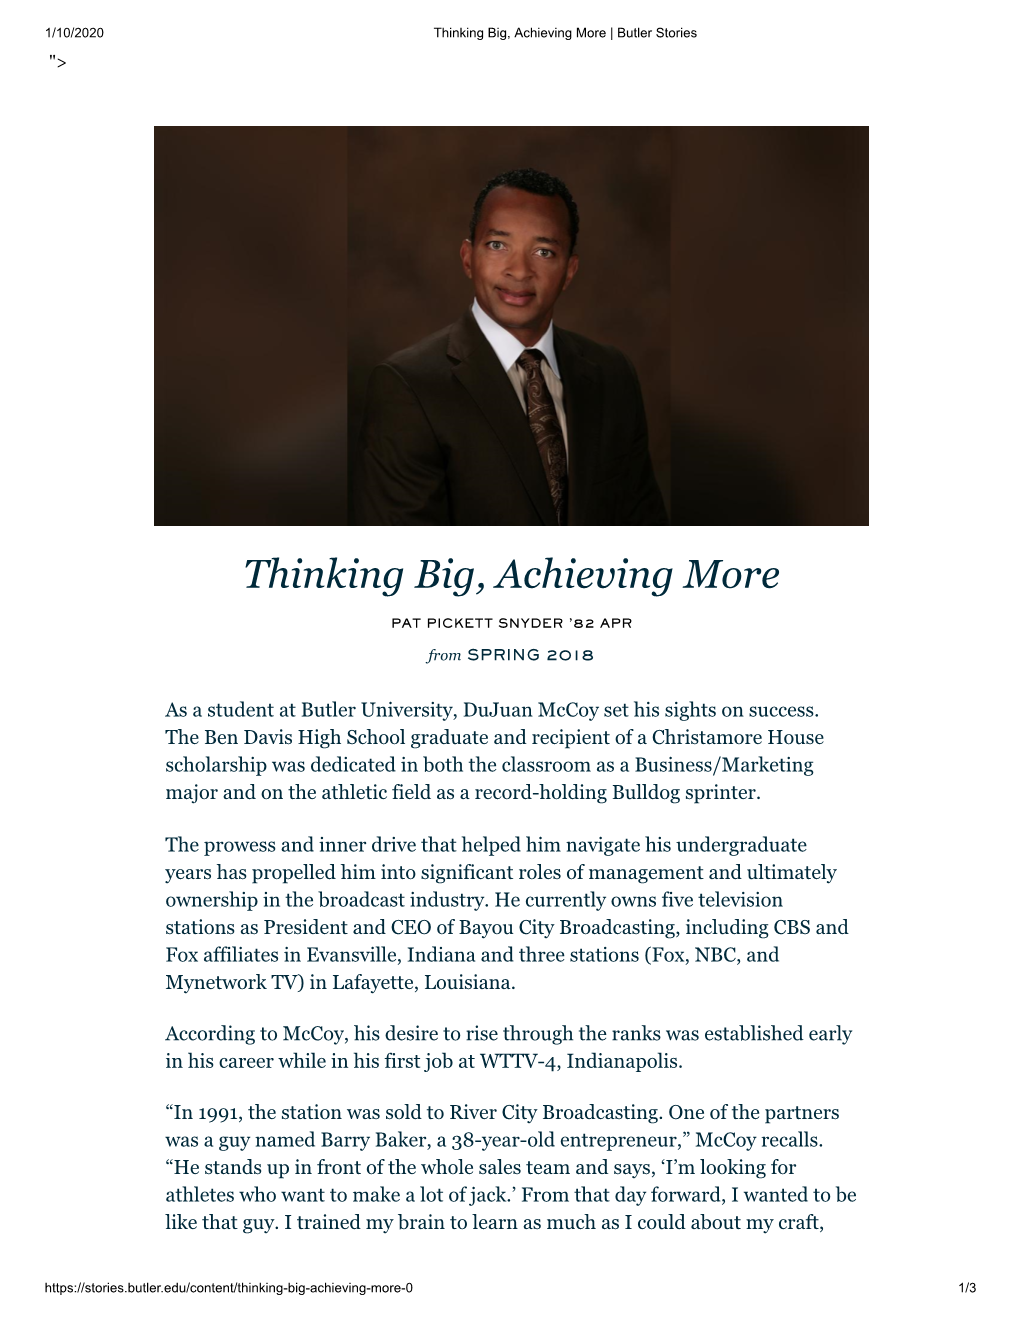 Thinking Big, Achieving More | Butler Stories ">